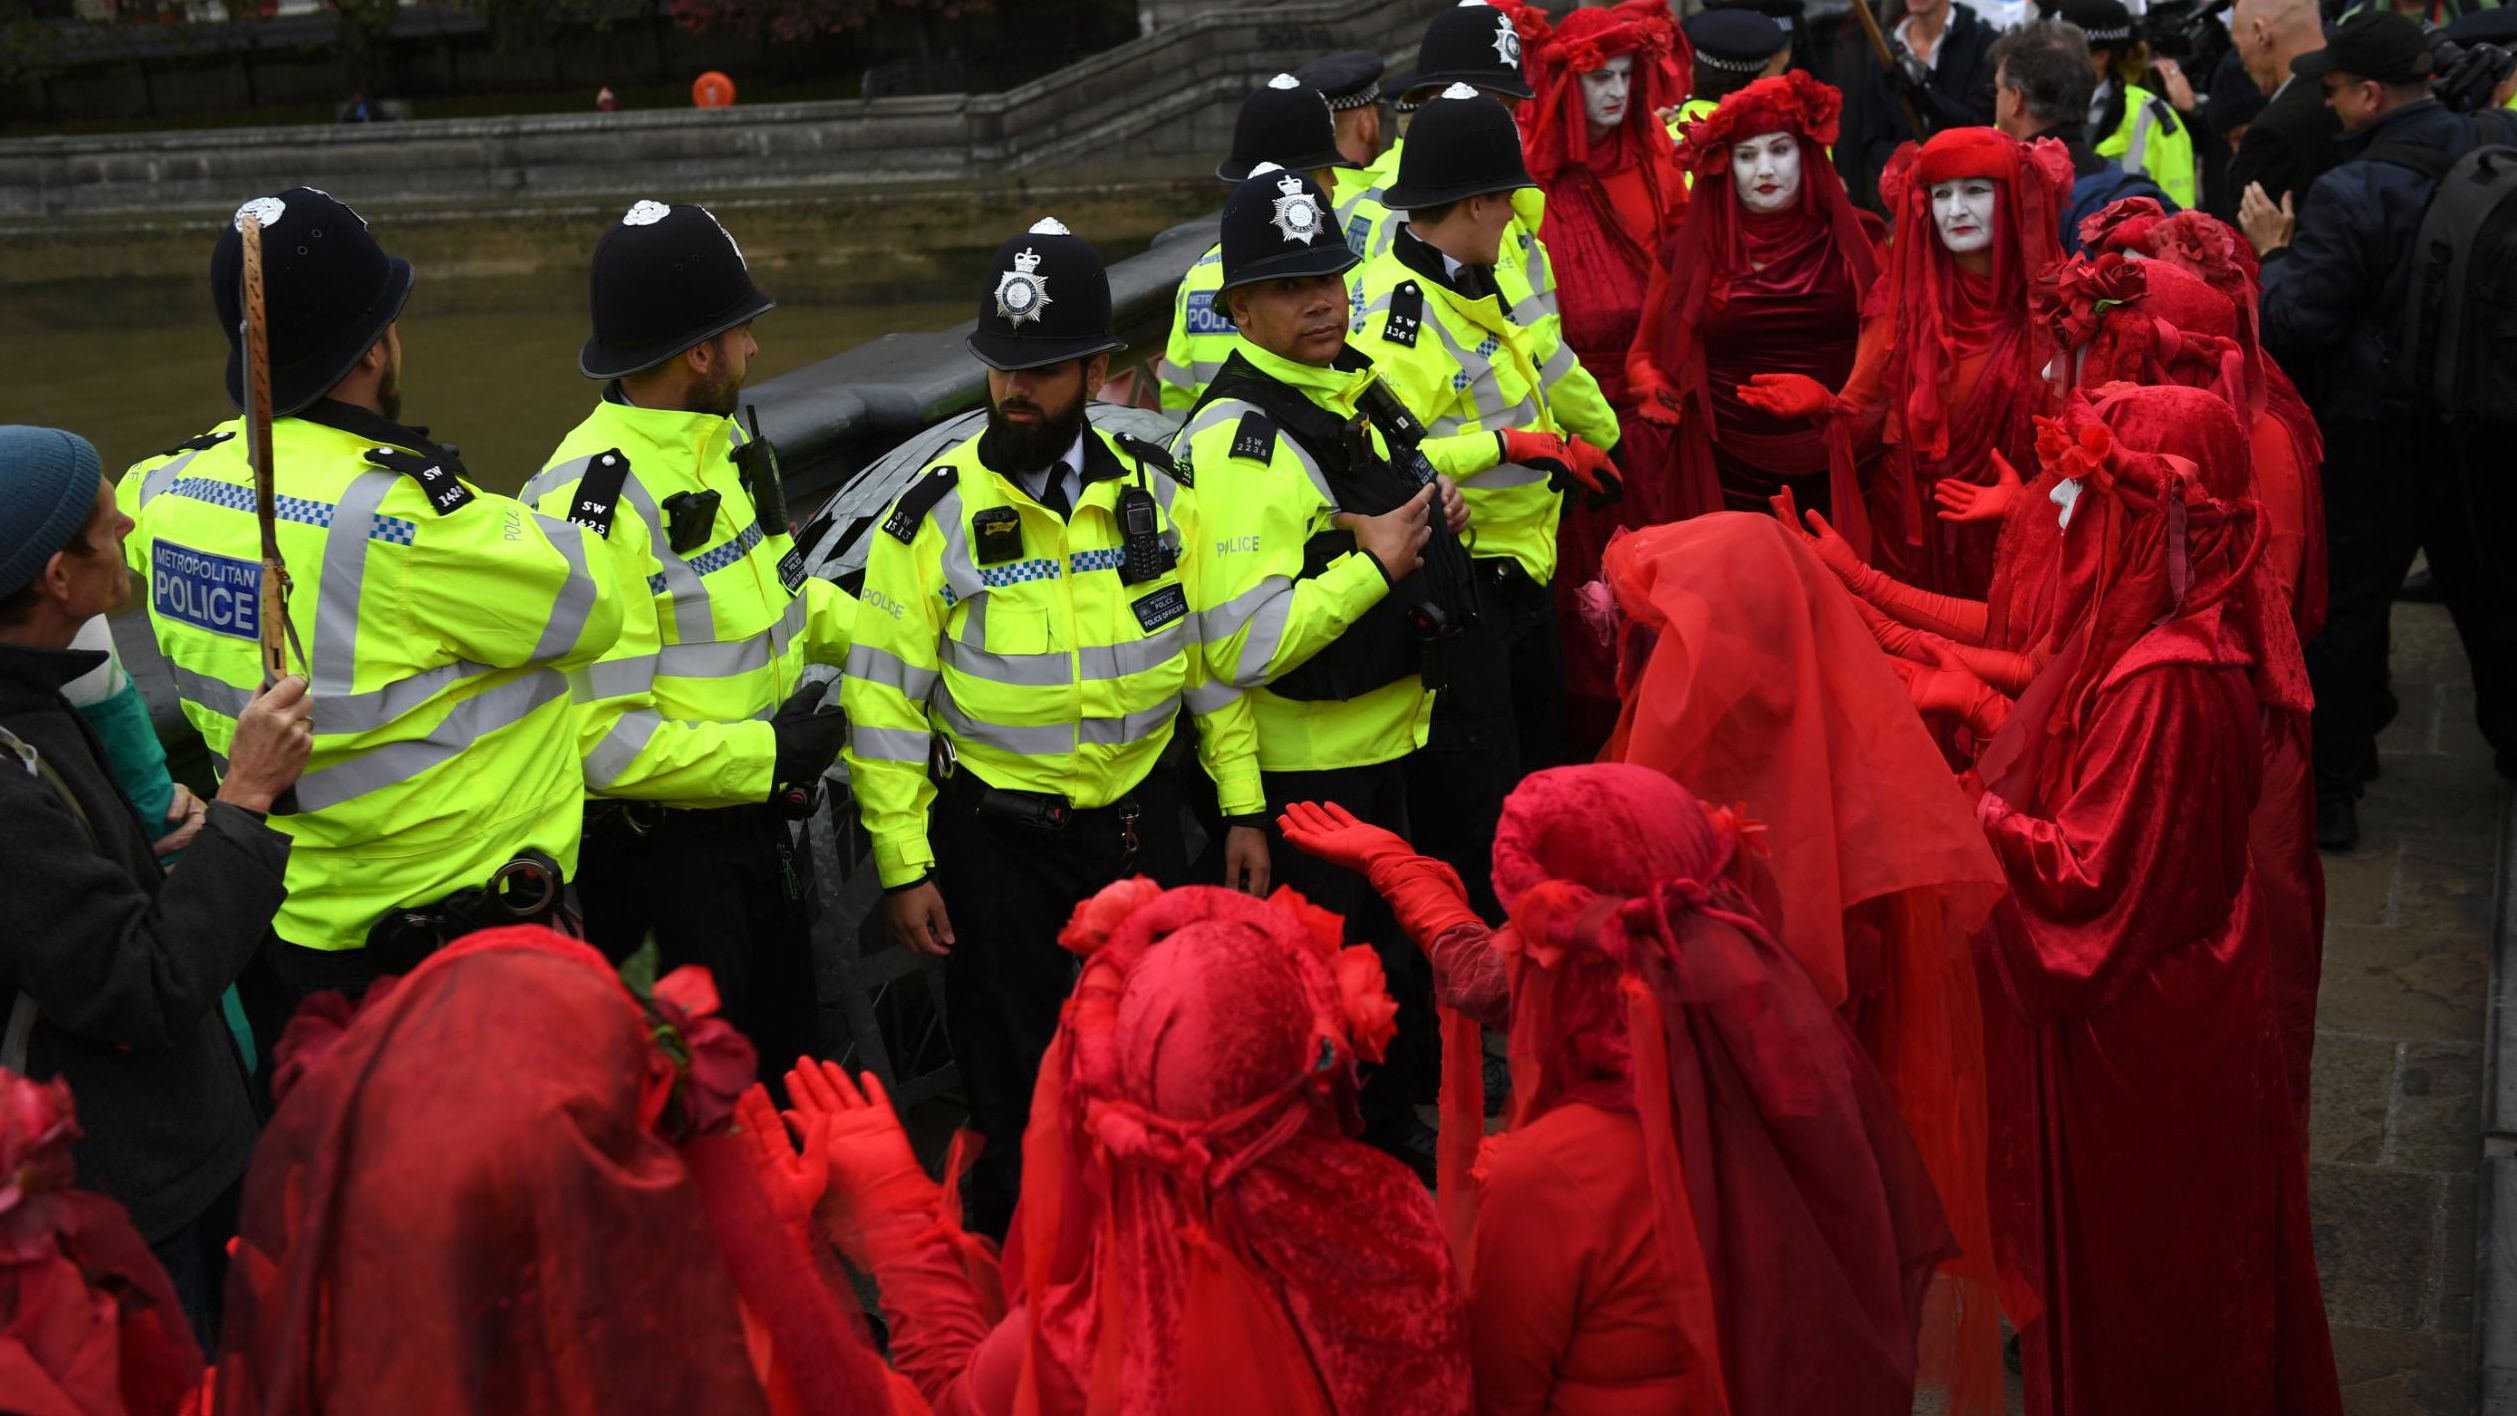 The Red Brigade surrounds police in London on October 7. This crimson-robed troupe is common at Extinction Rebellion protests and is the creation of the Invisible Circus, a street performance group.